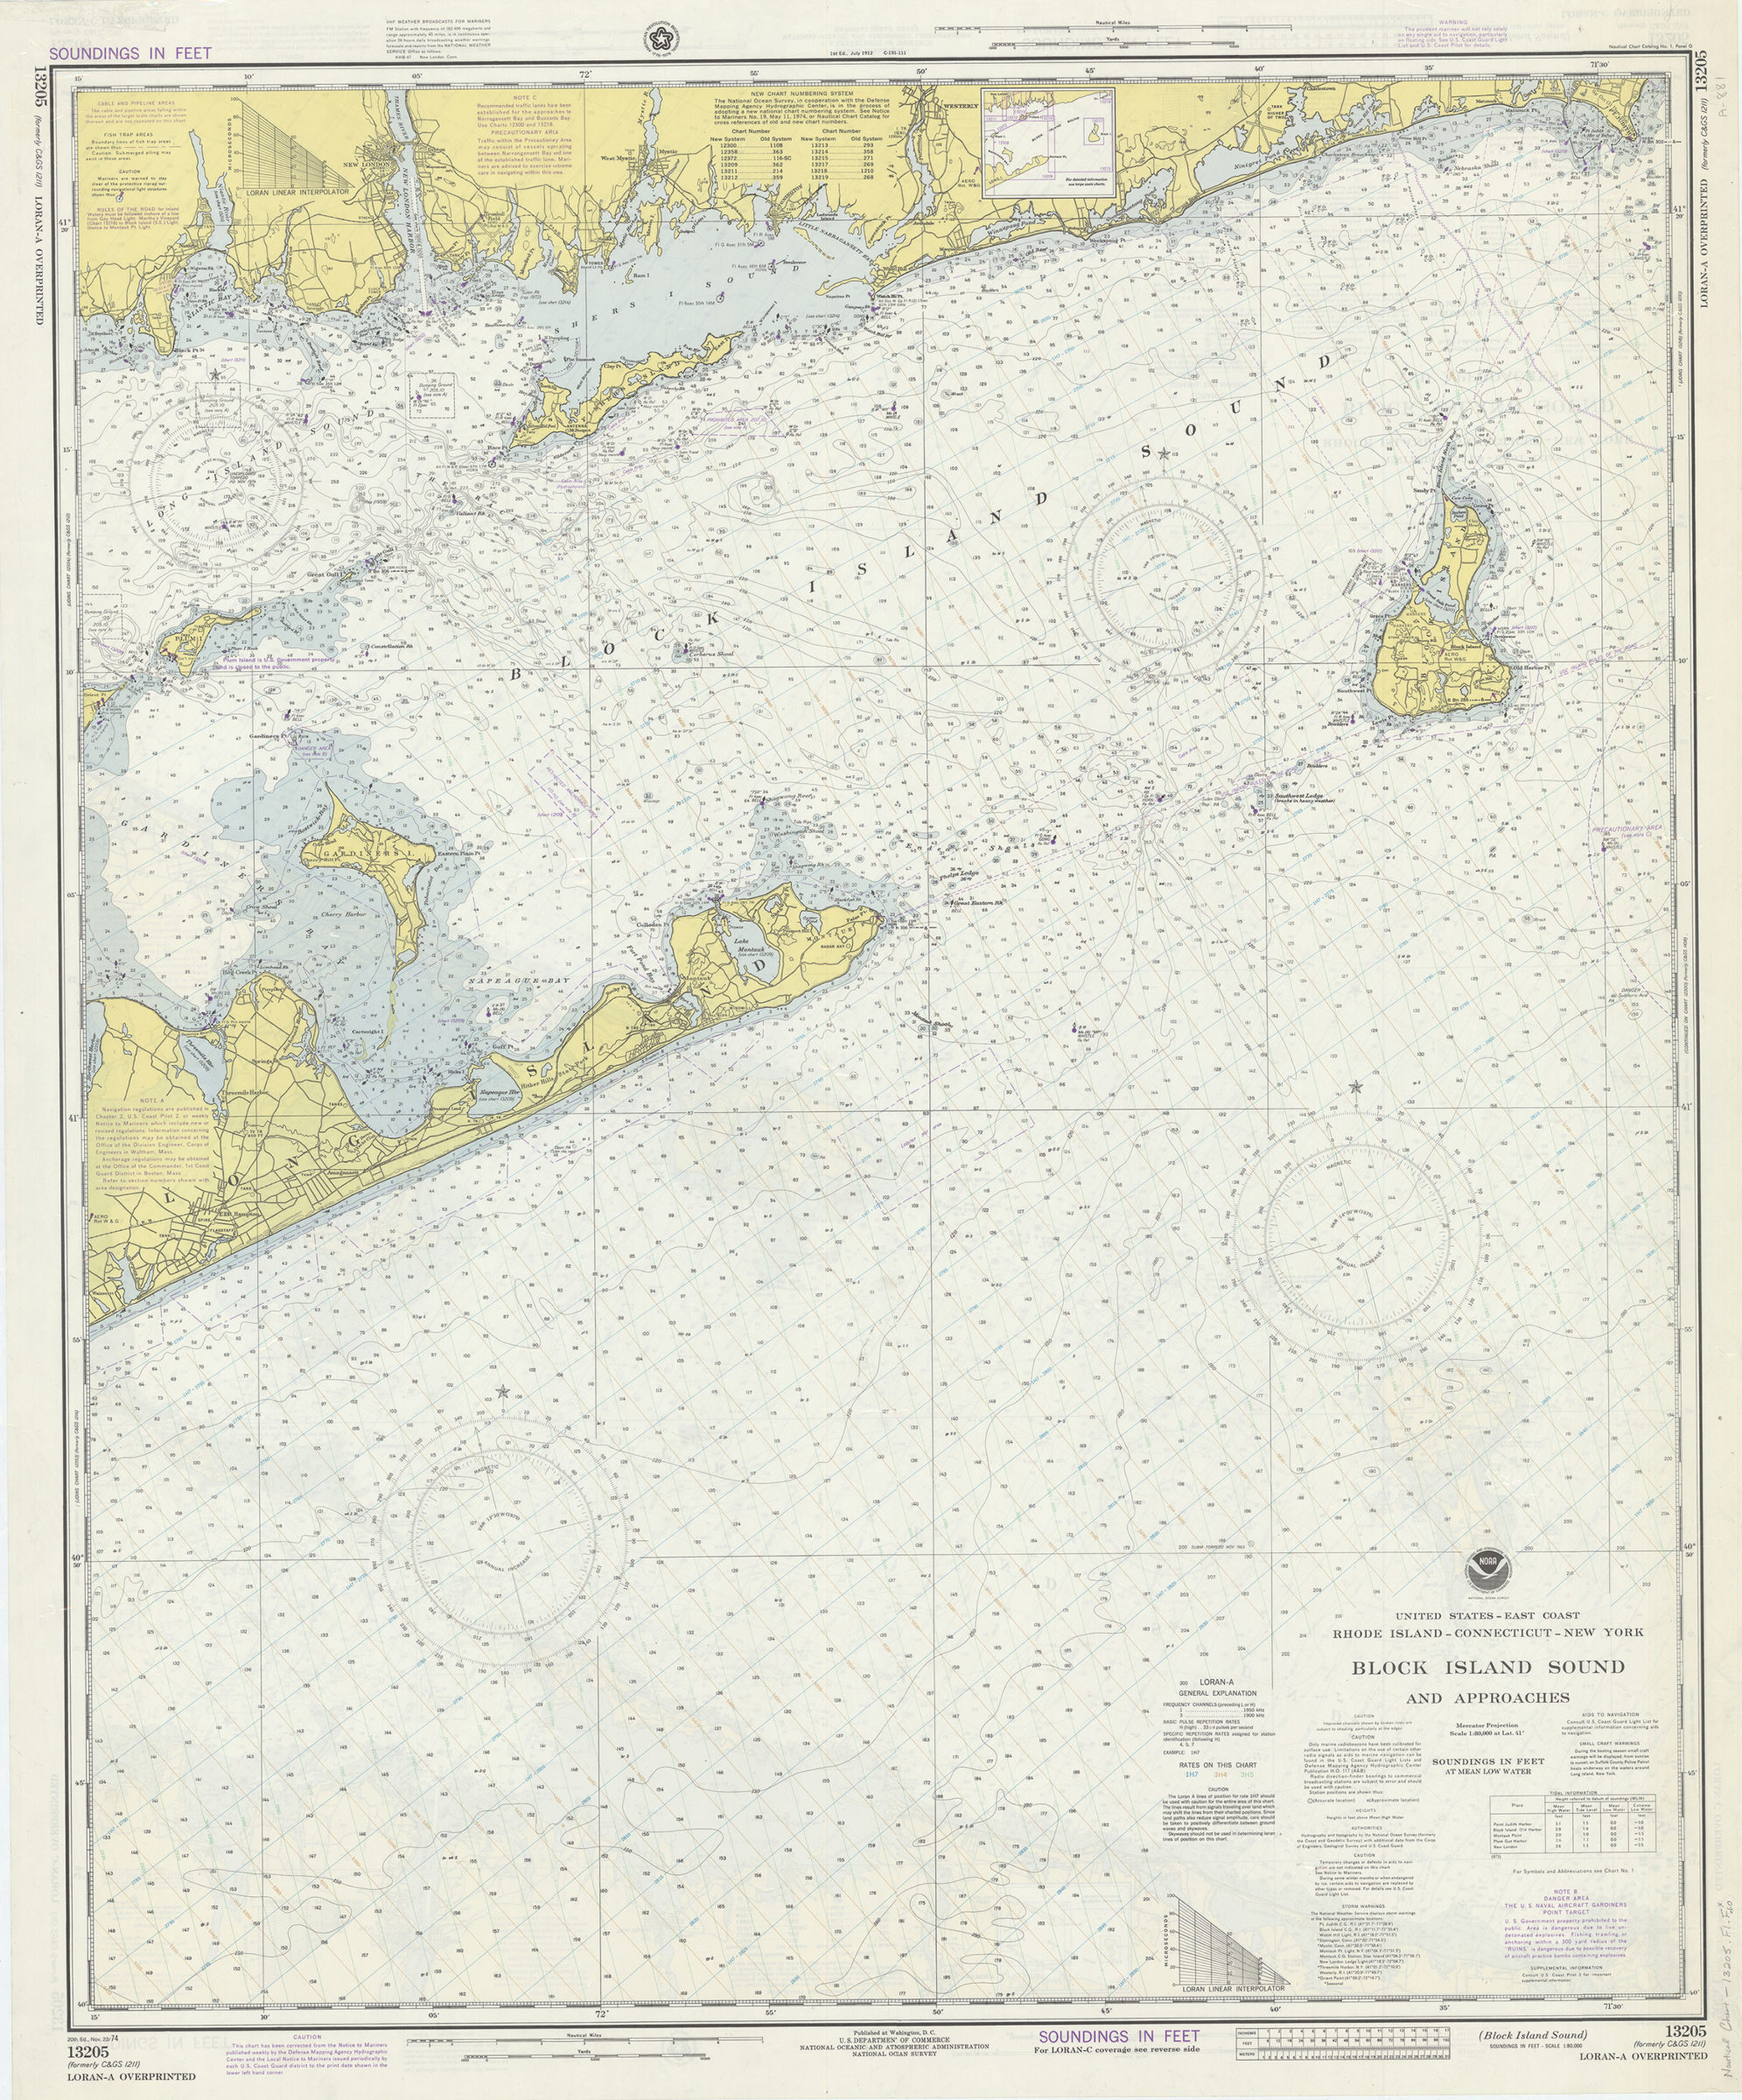 https://mapcollections.brooklynhistory.org/wp-content/uploads/sites/8/2020/02/bhs_nautical003972893_a-1991x2400.jpg